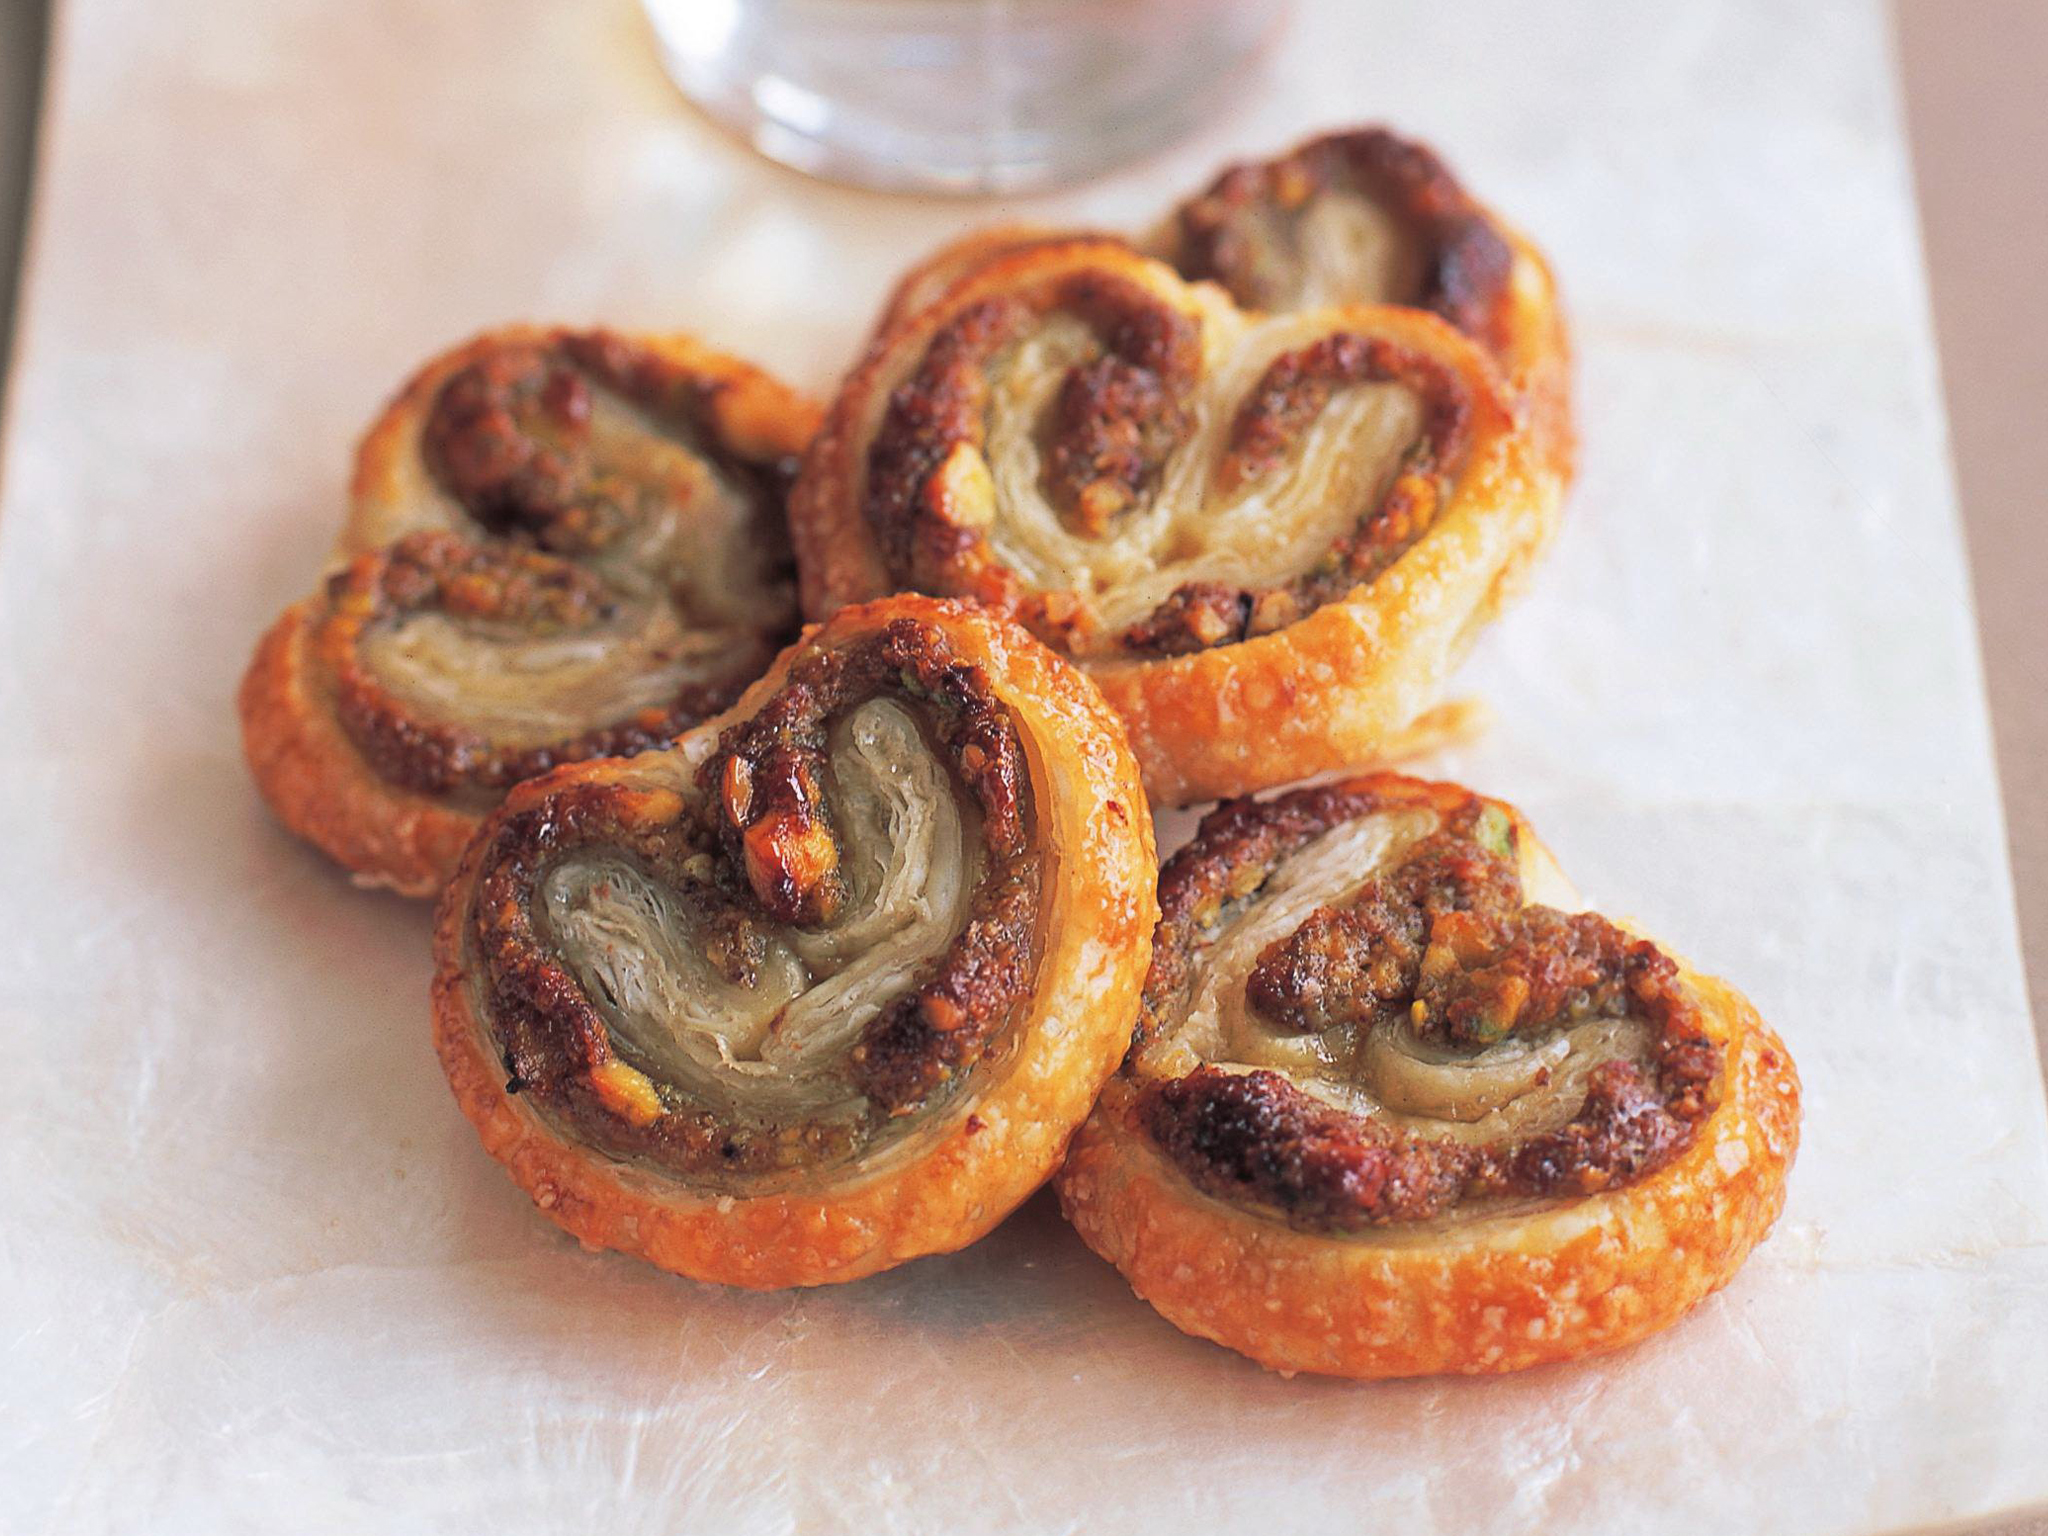 Honey-coated pistachio and rosewater palmiers